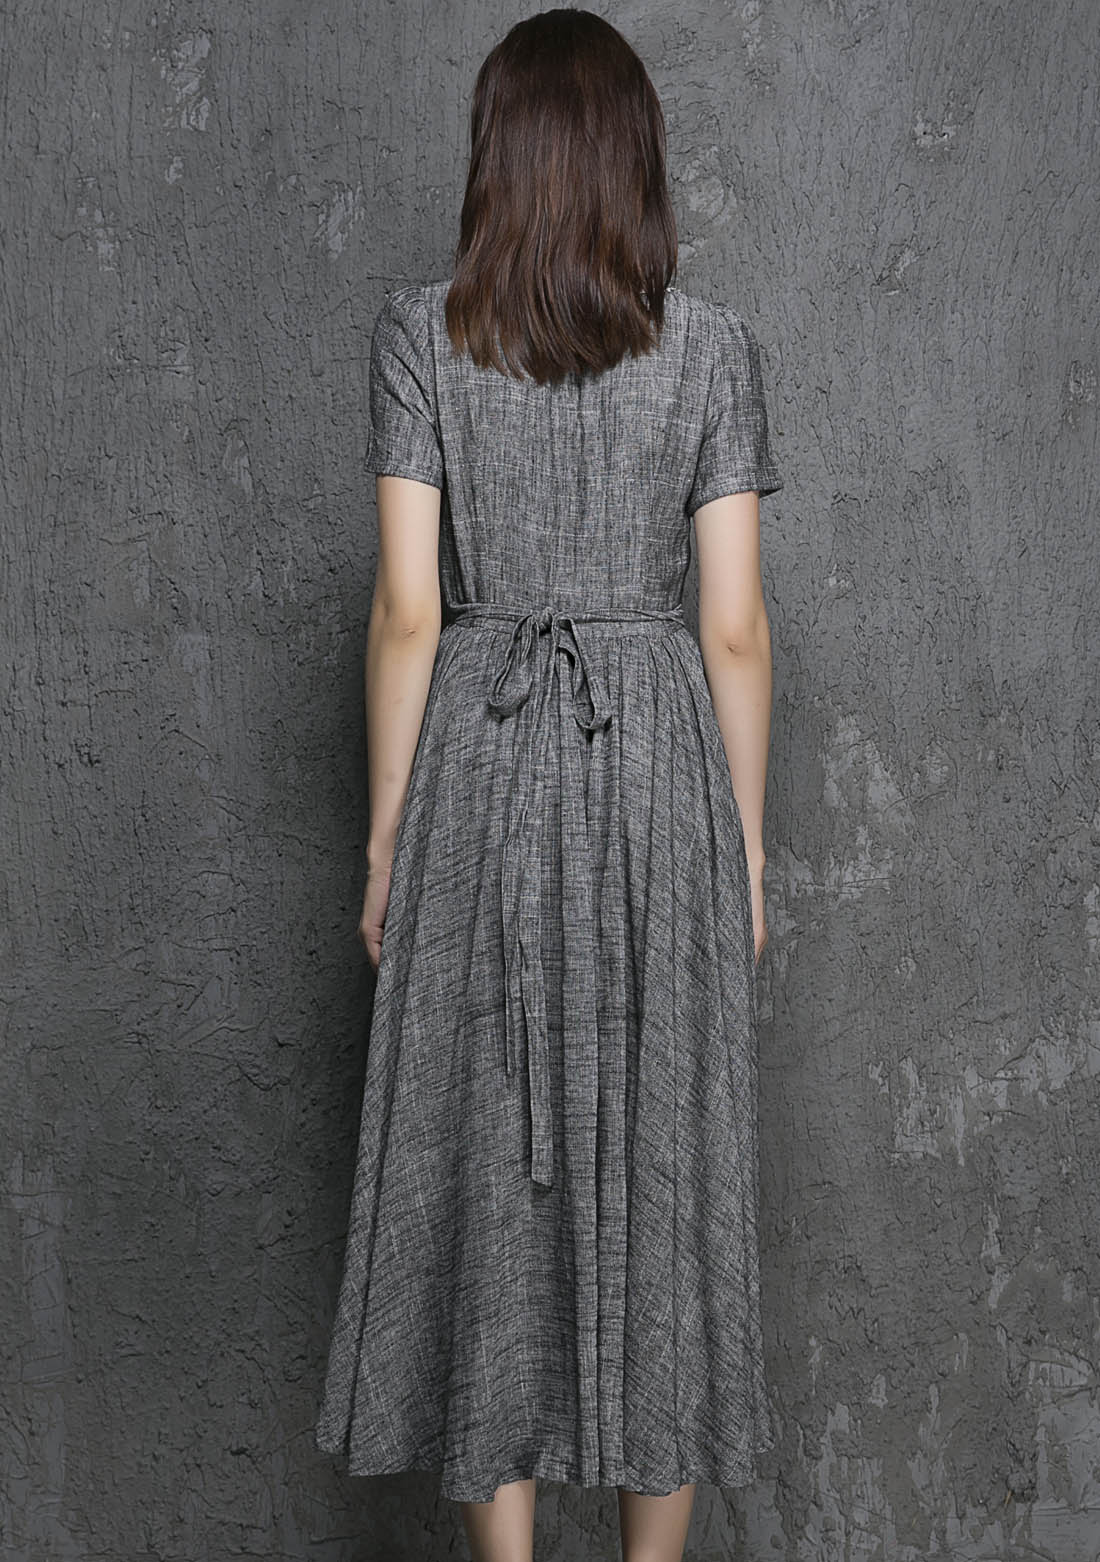 Grey linen midi summer dress with white lace for wedding bridesmaid 1319